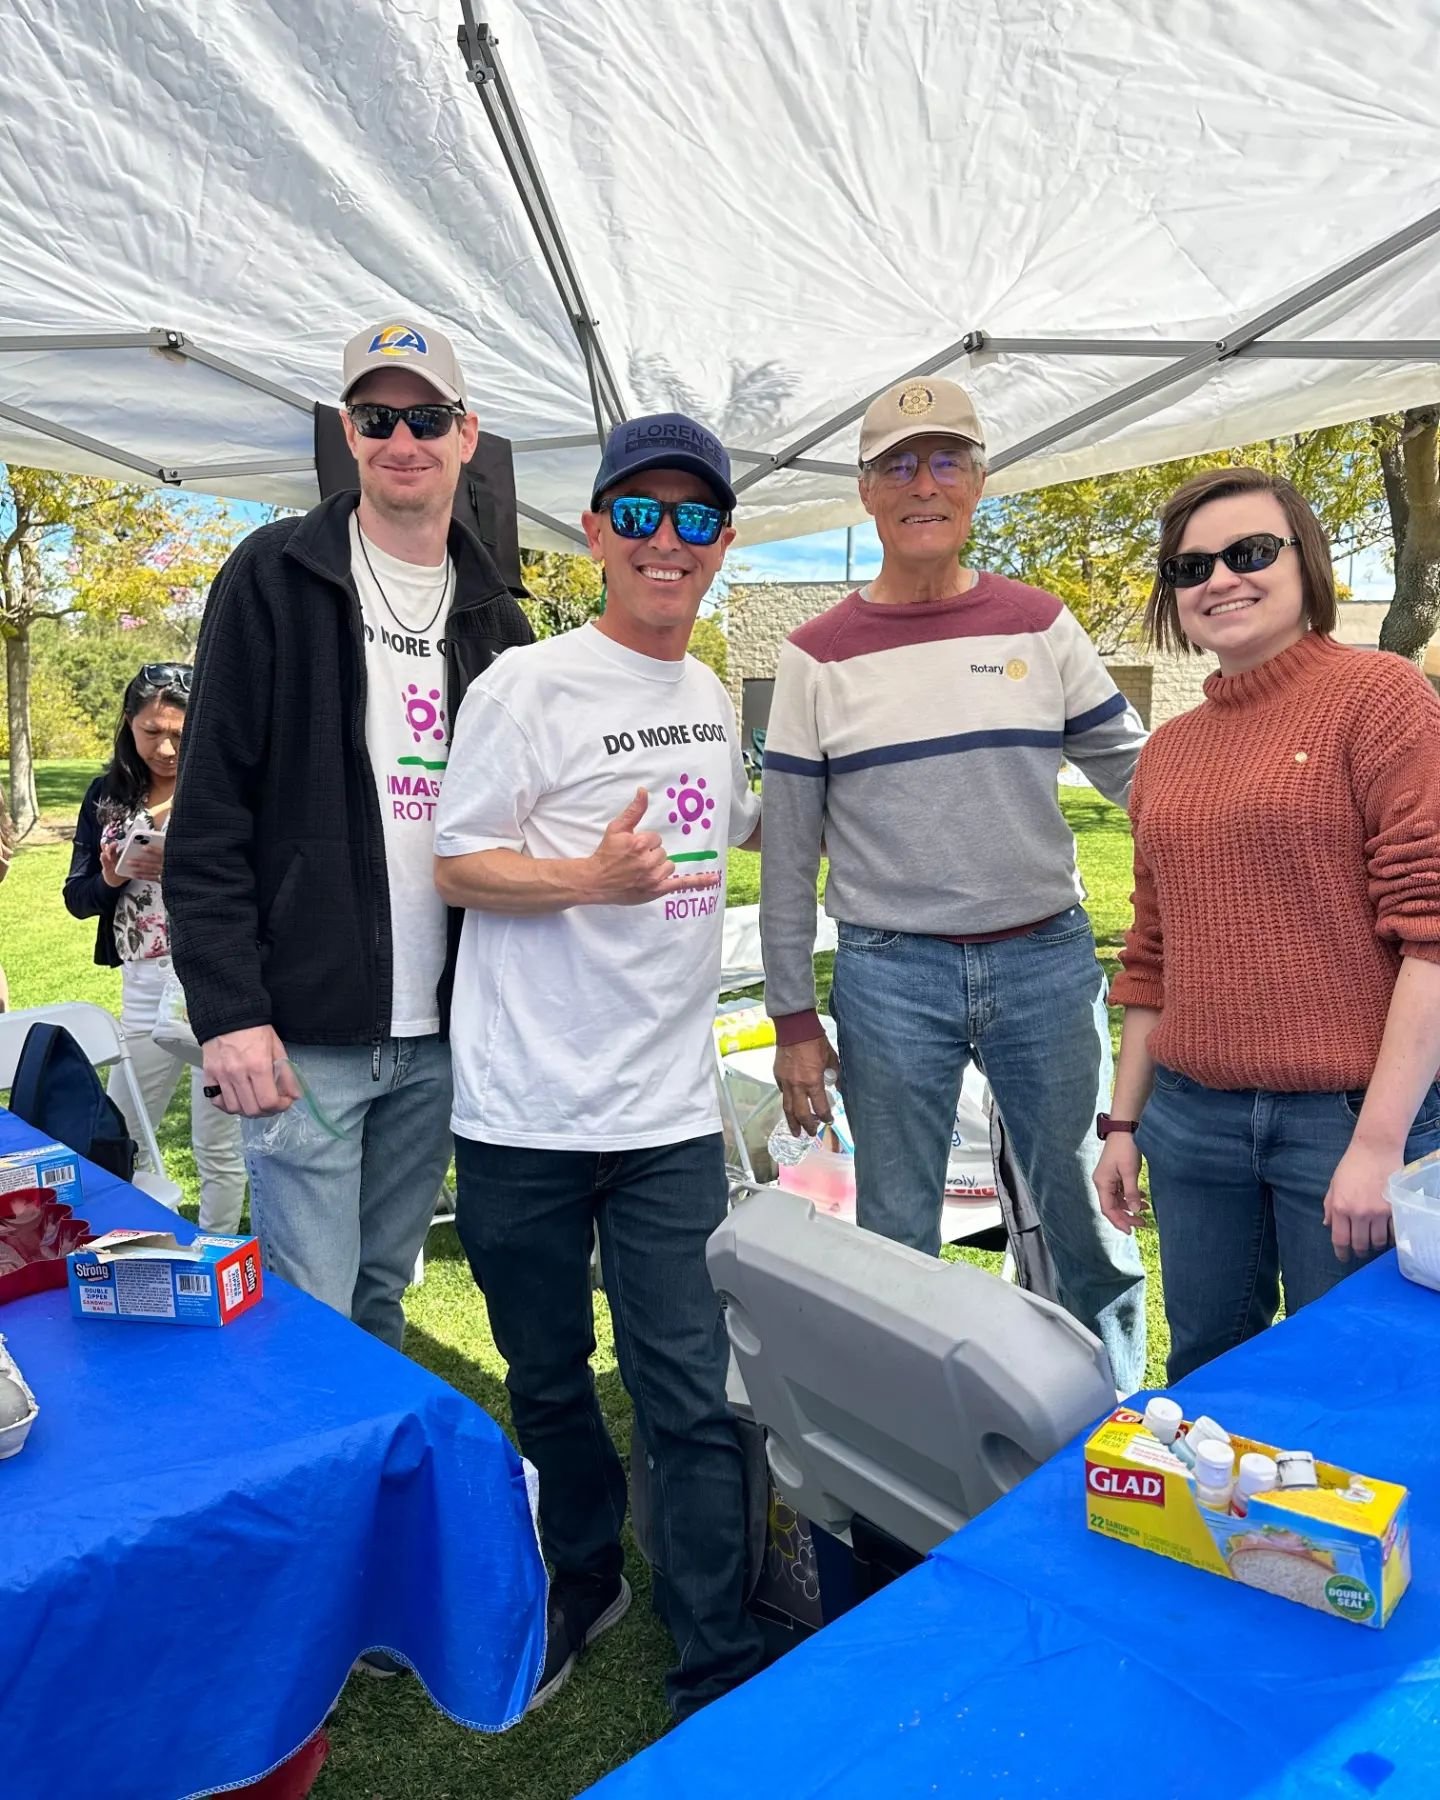 Thank you NEOC Rotary member @matt_kozuki for setting up to help with the Anaheim Hills Rotary Easter egg hunt back in March! Pictures as well are members Tori, Rob, and Jim. It was a fun time!

We have more events coming up. We just need to get a bi